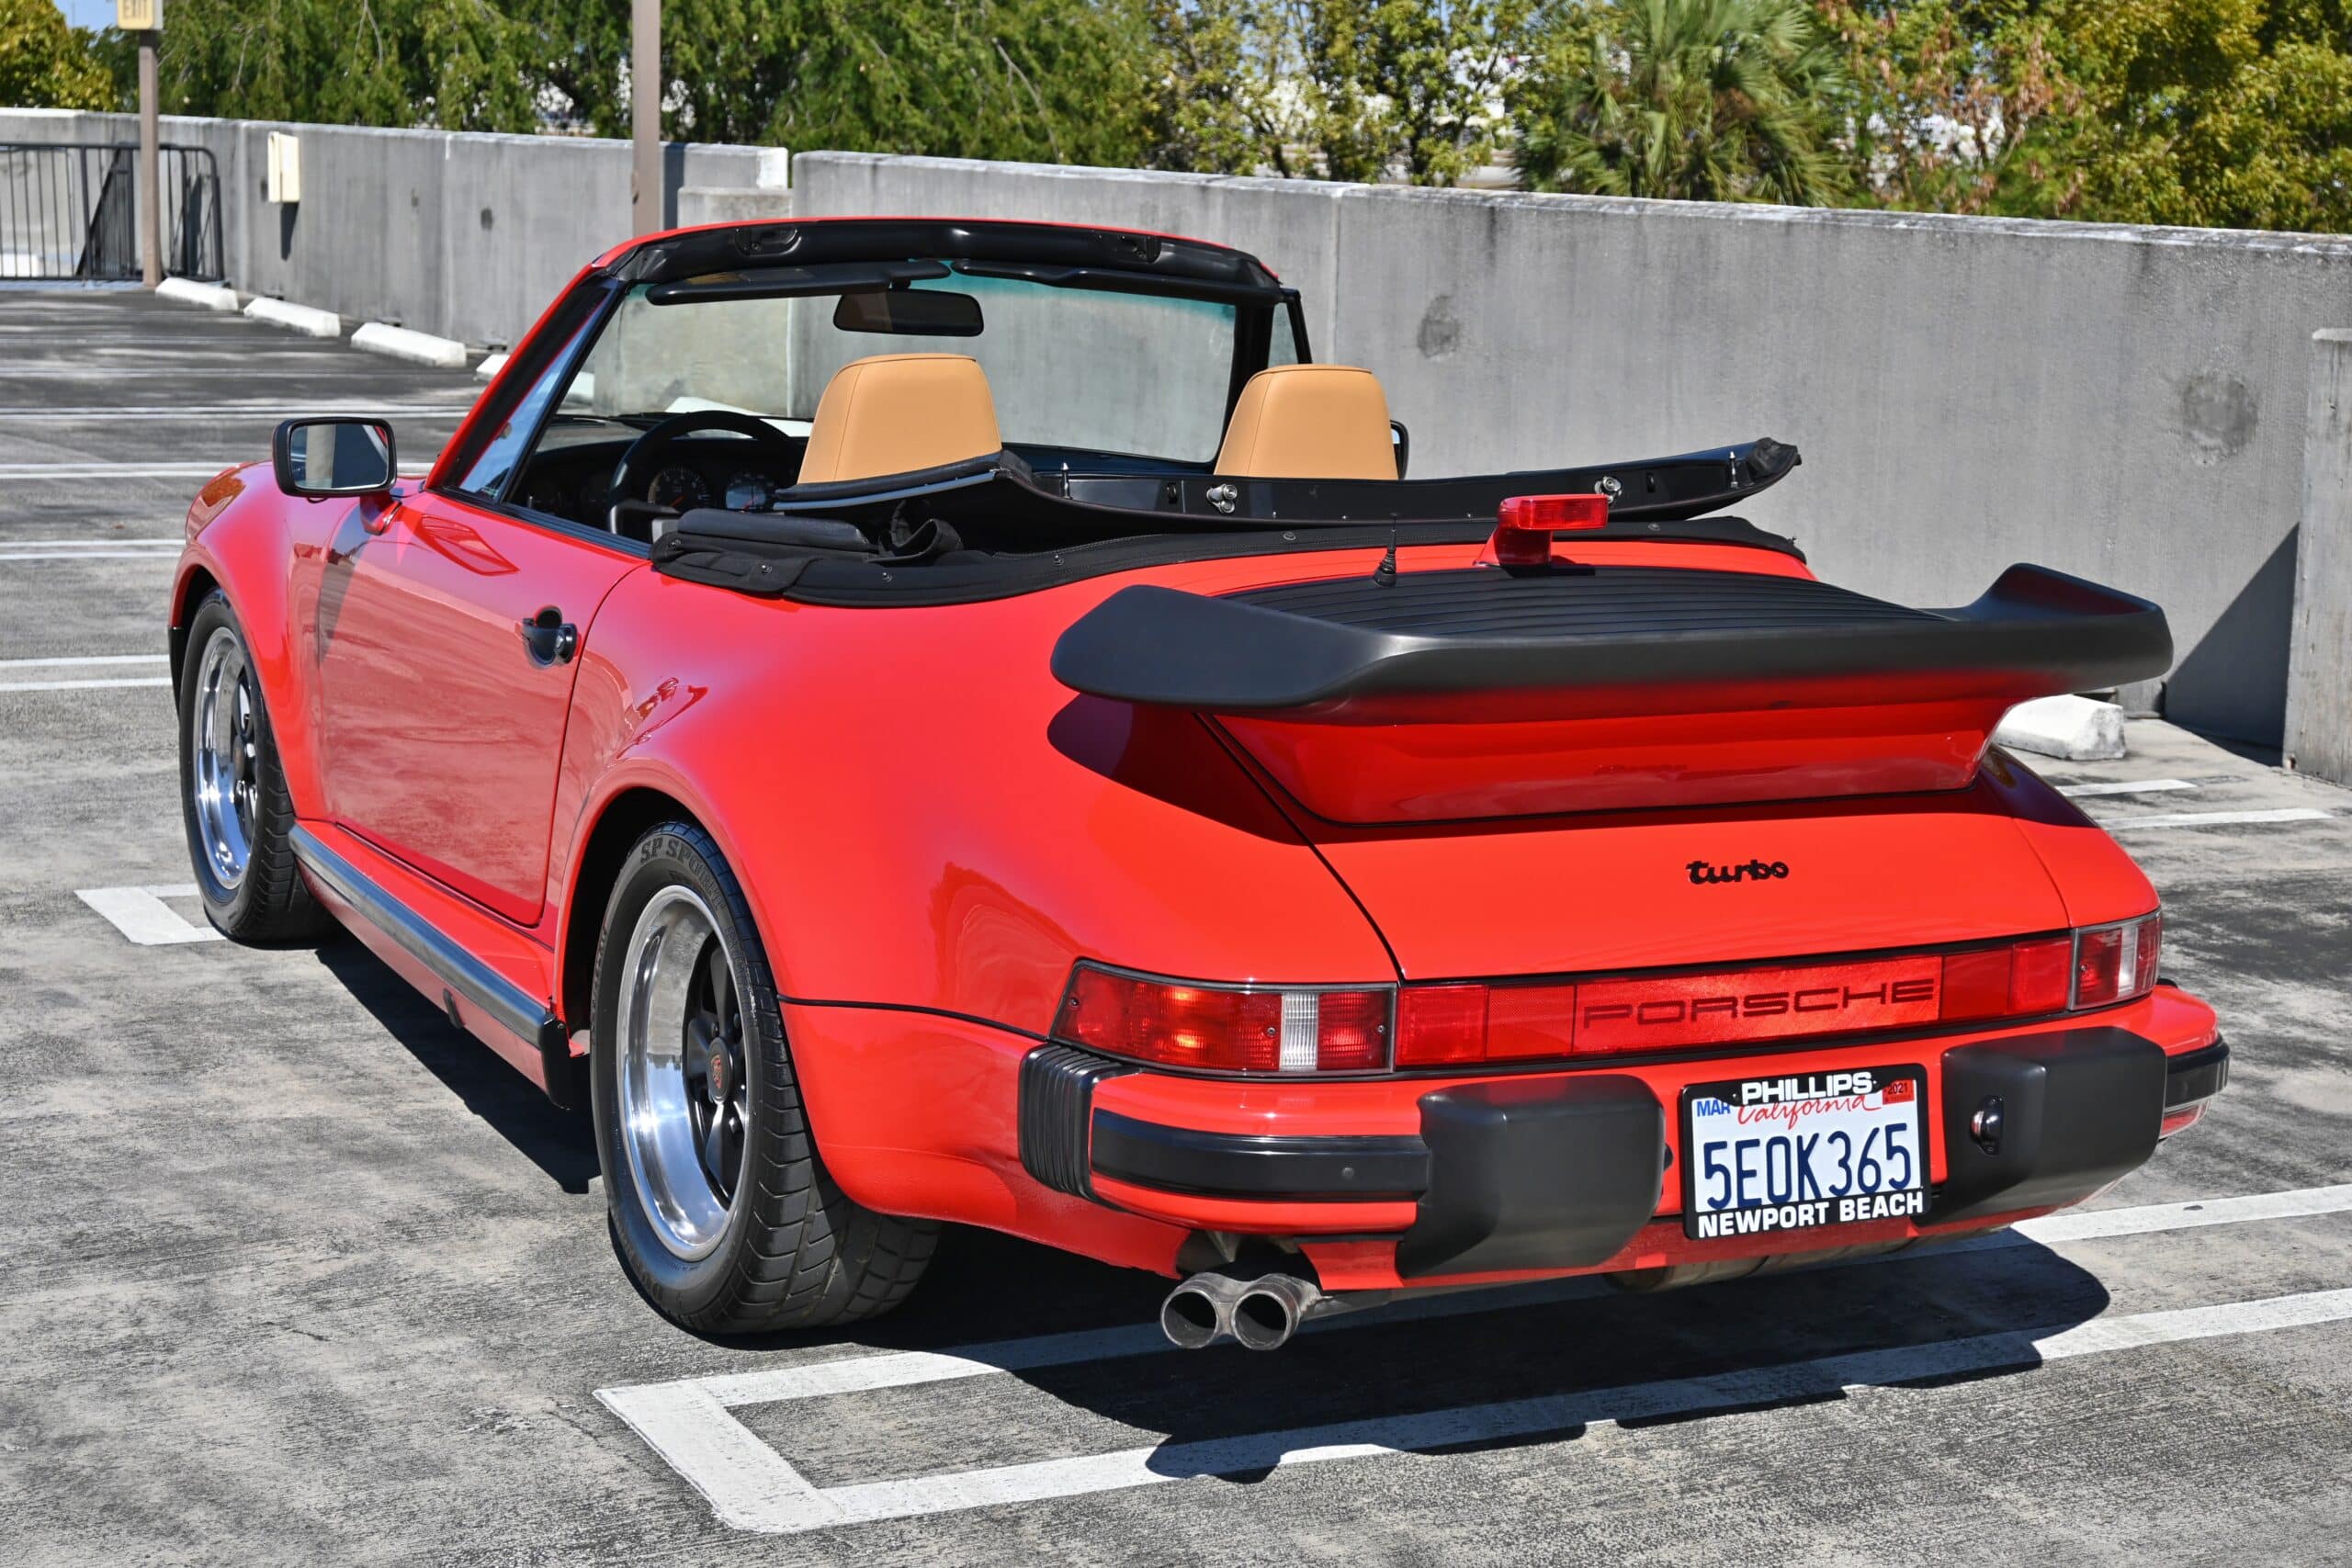 1989 Porsche 930 Turbo 911 California Car/Special Wishes Options/5 Speed/COA/ Engine Out Service/ Like New!